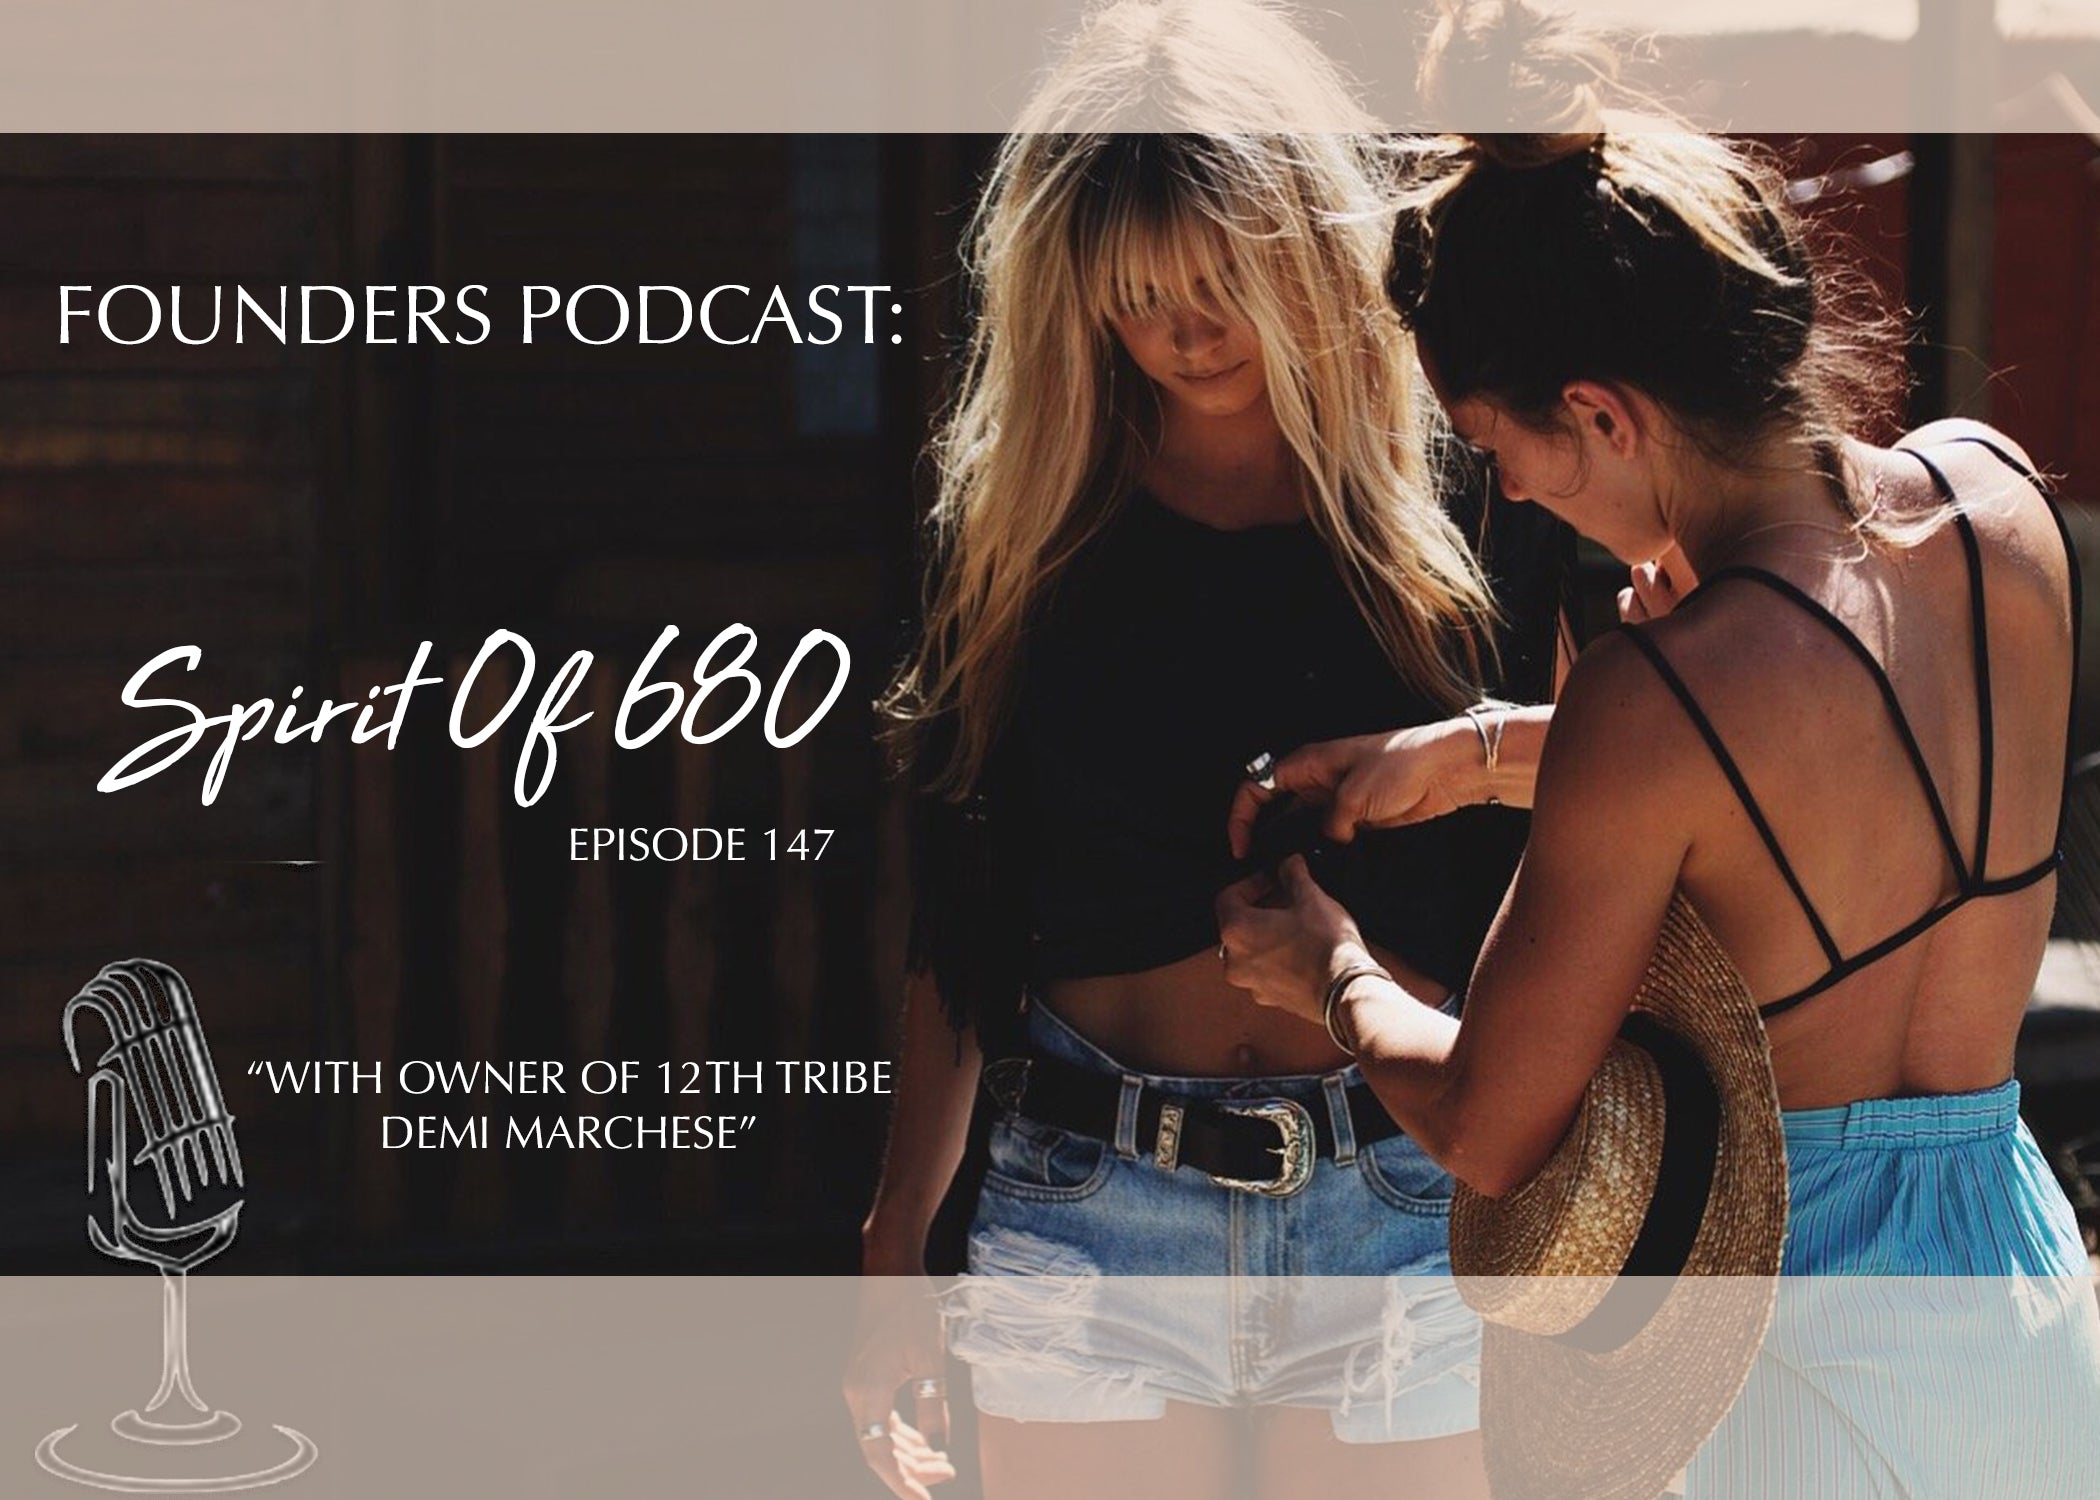 Founders Podcast: Spirit of 680